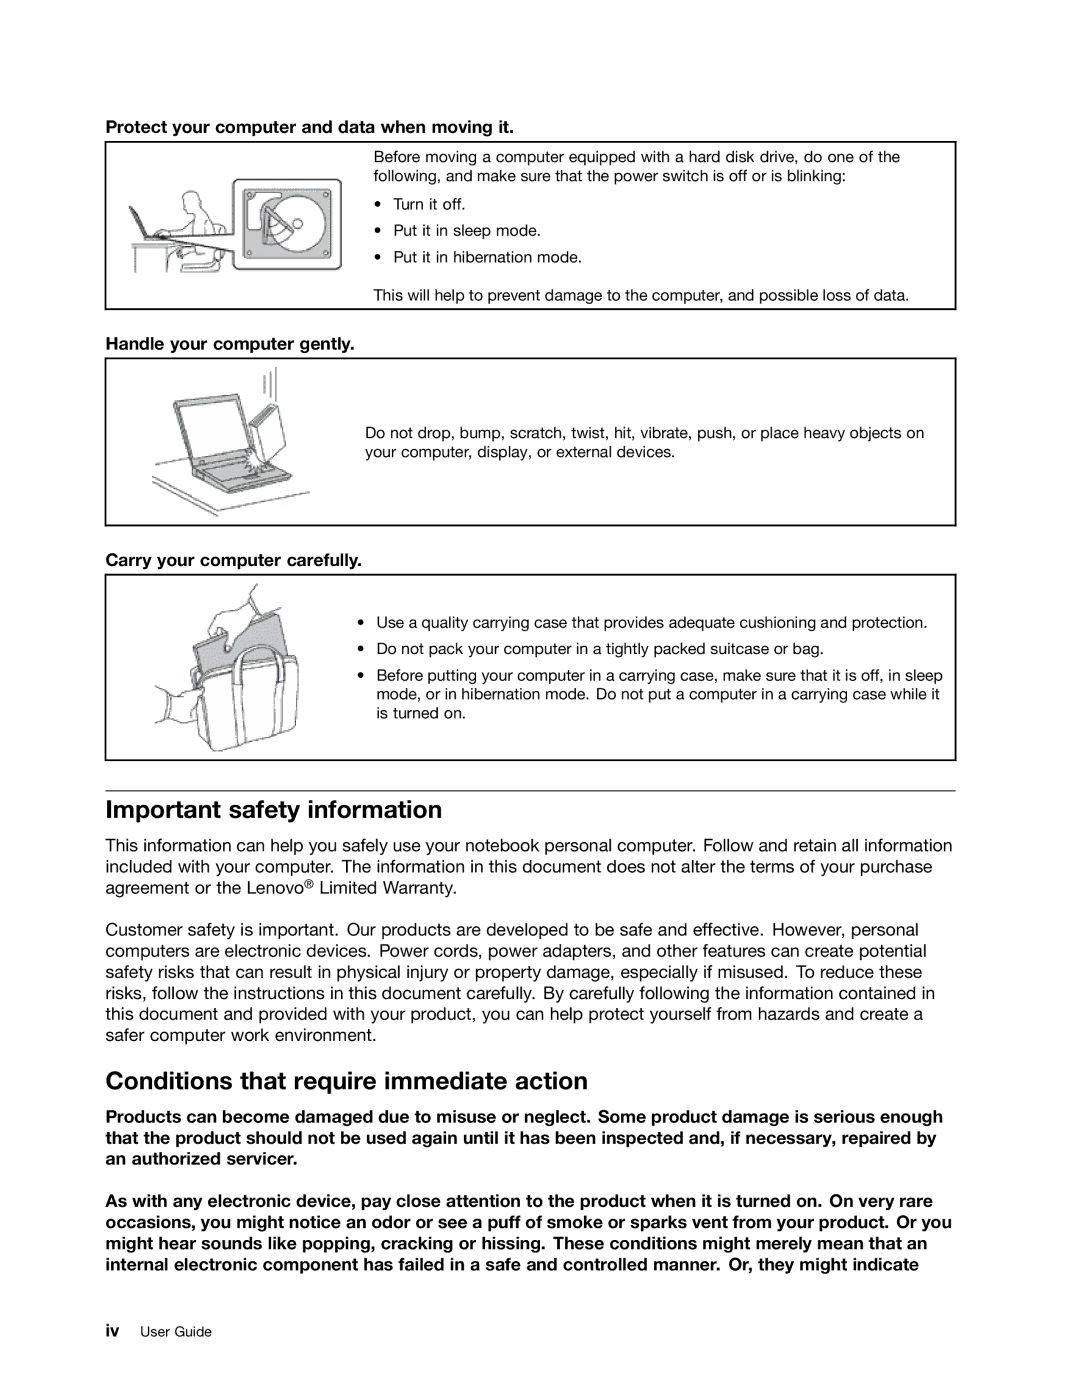 Lenovo B485 manual Important safety information, Conditions that require immediate action, Handle your computer gently 